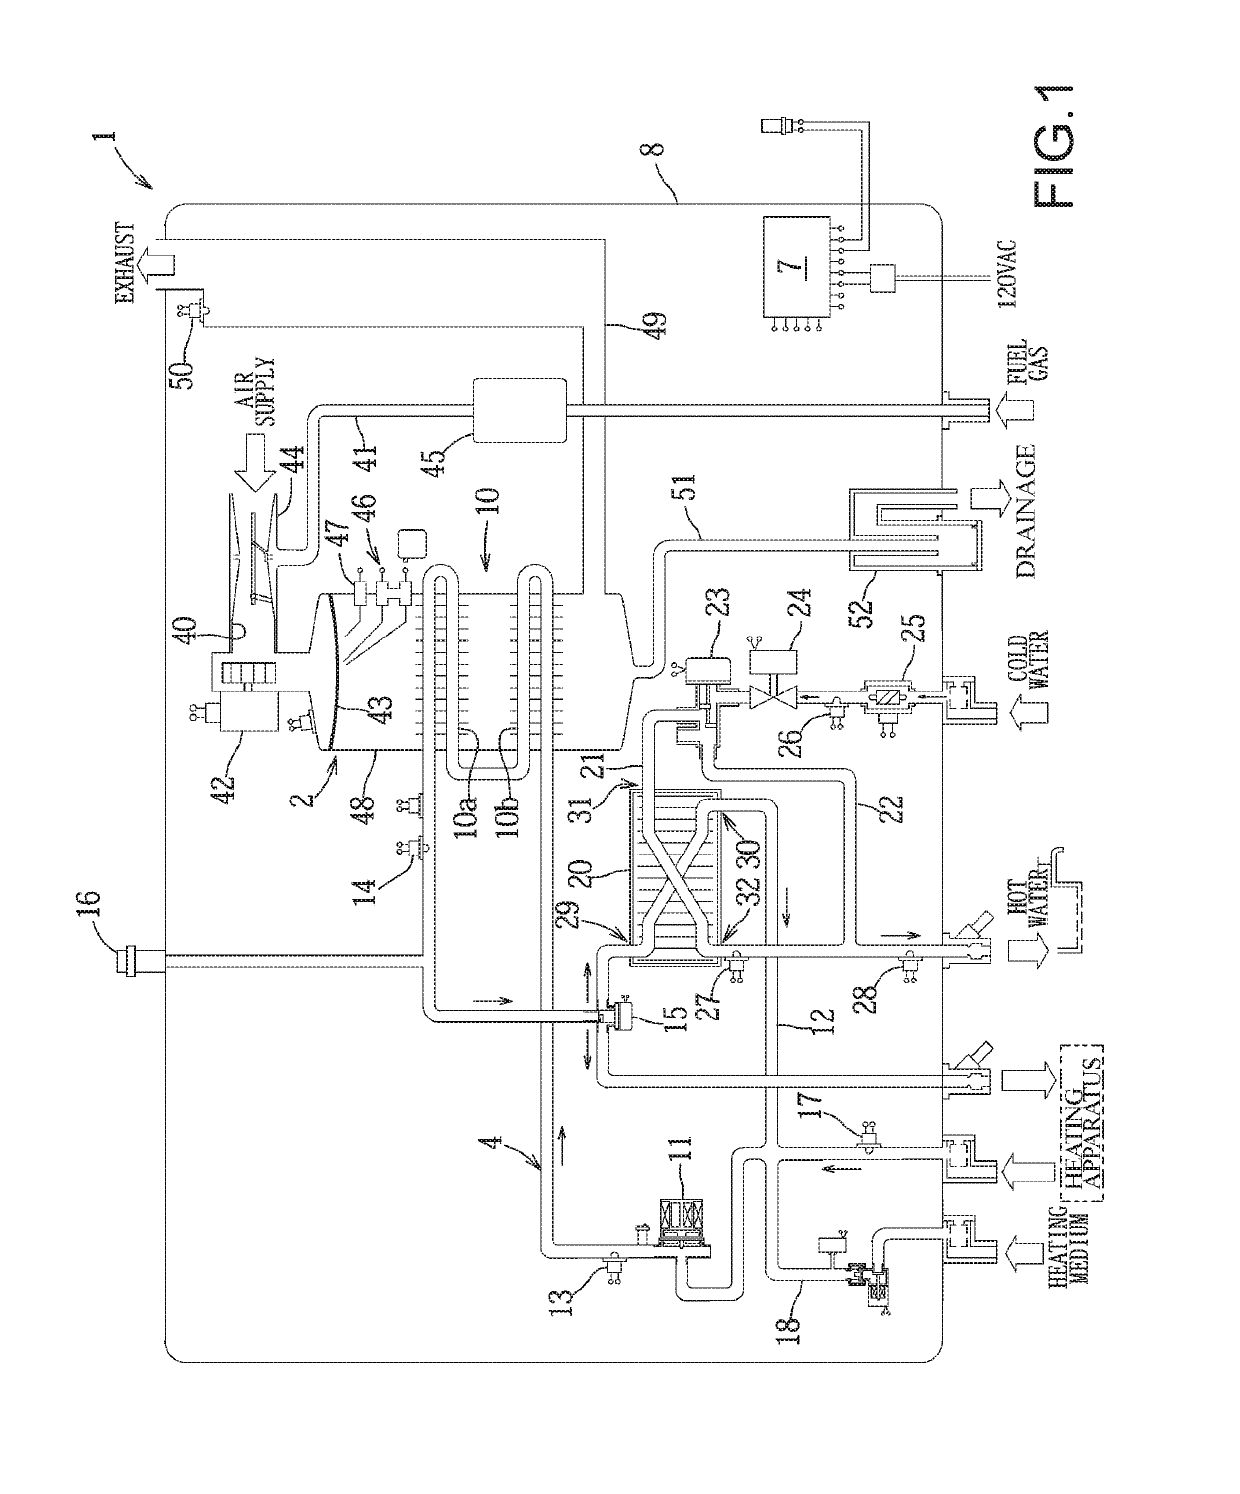 Heating and hot water supply device